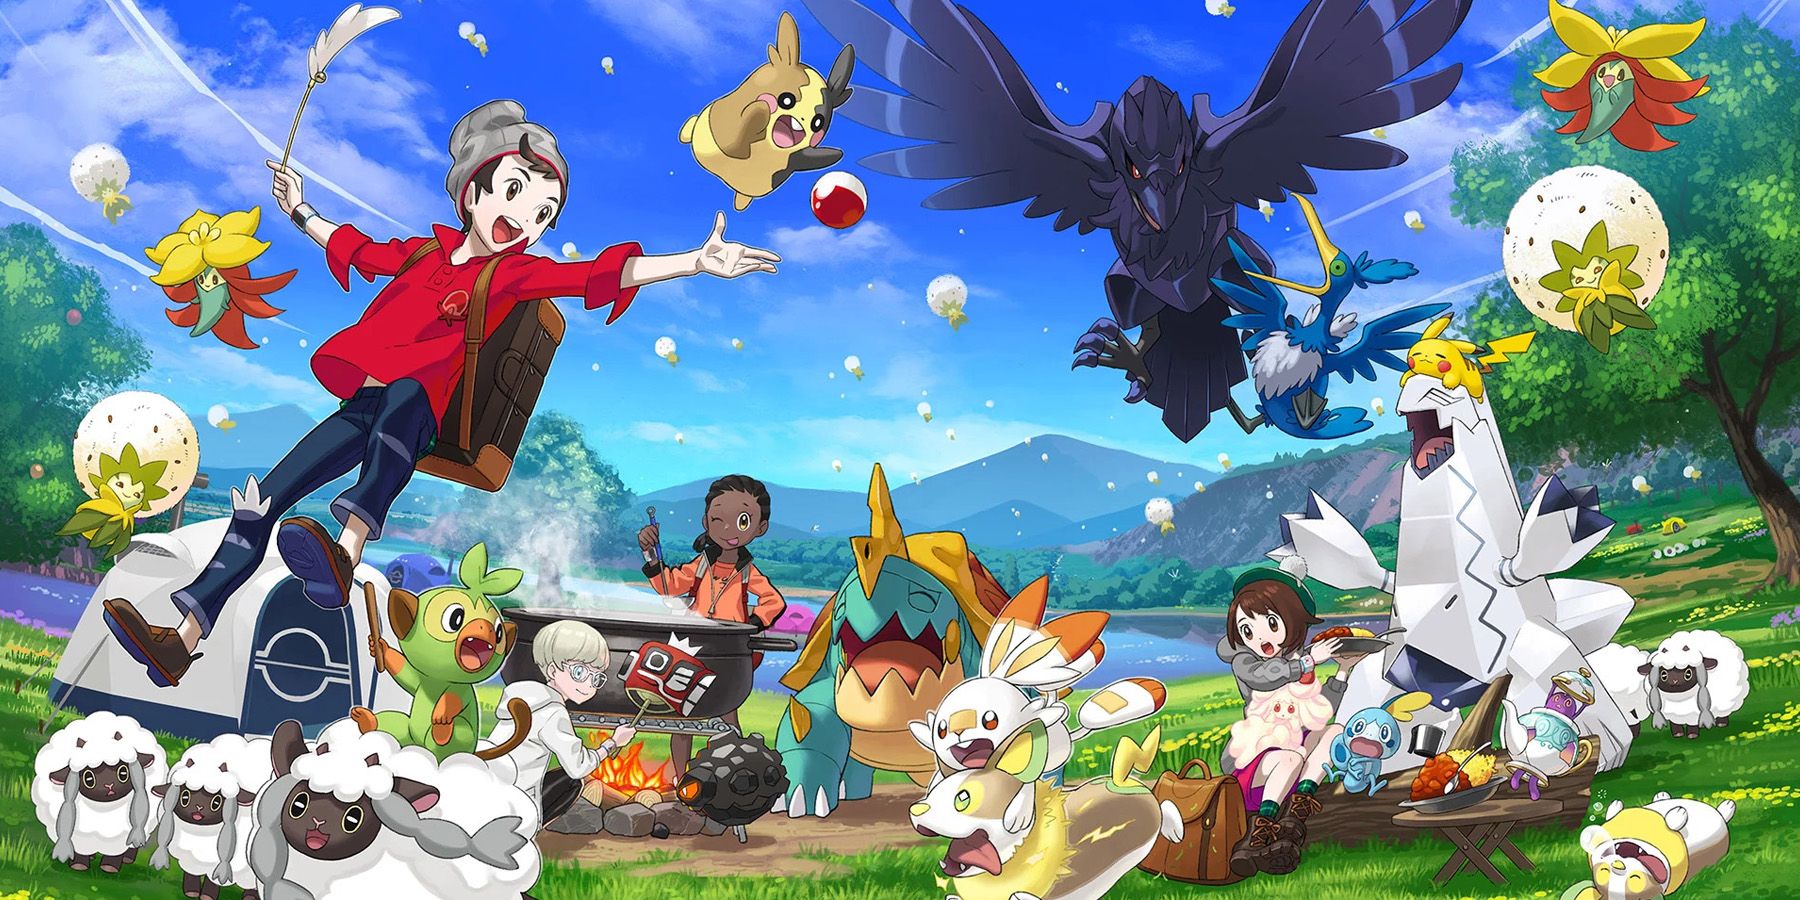 Pokémon Sword and Shield Pokedex Leaked A Complete List of Monsters